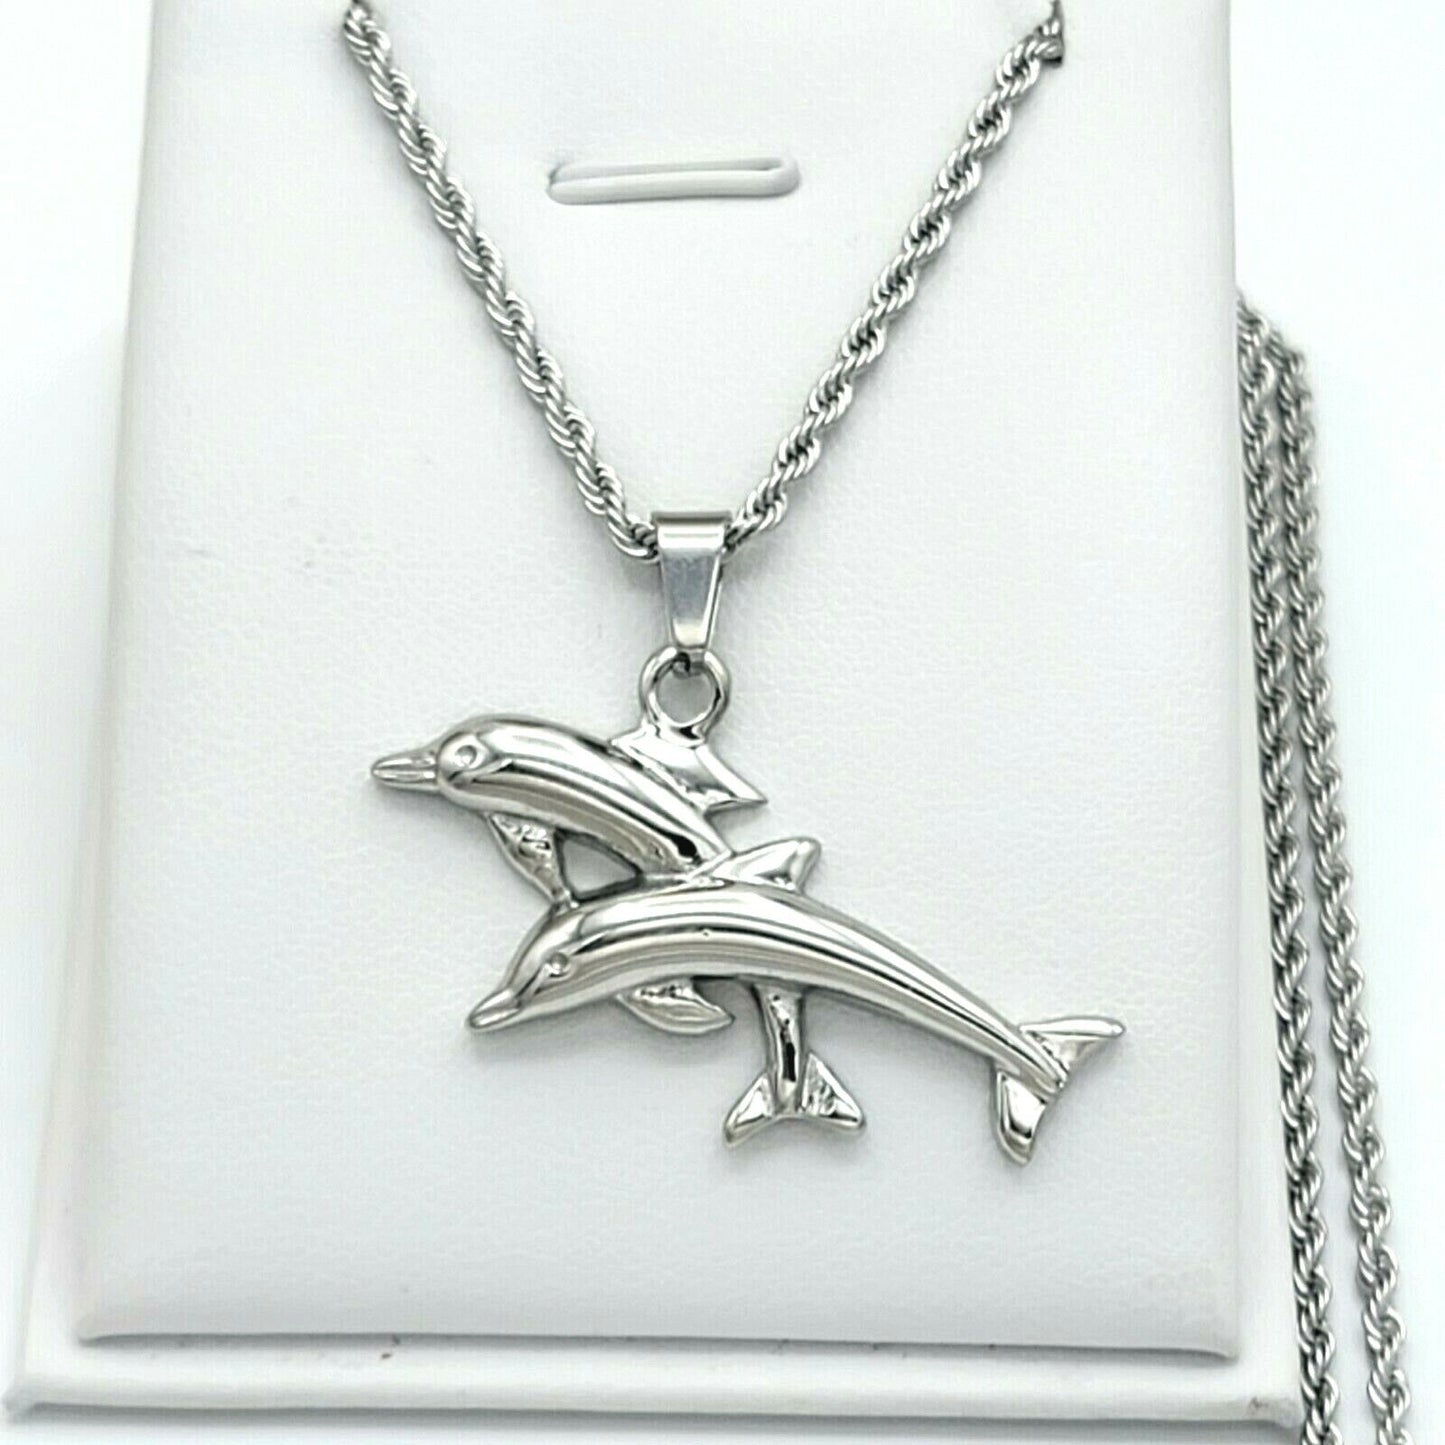 Necklaces - Stainless Steel. Couple Dolphin Pendant & Chain.